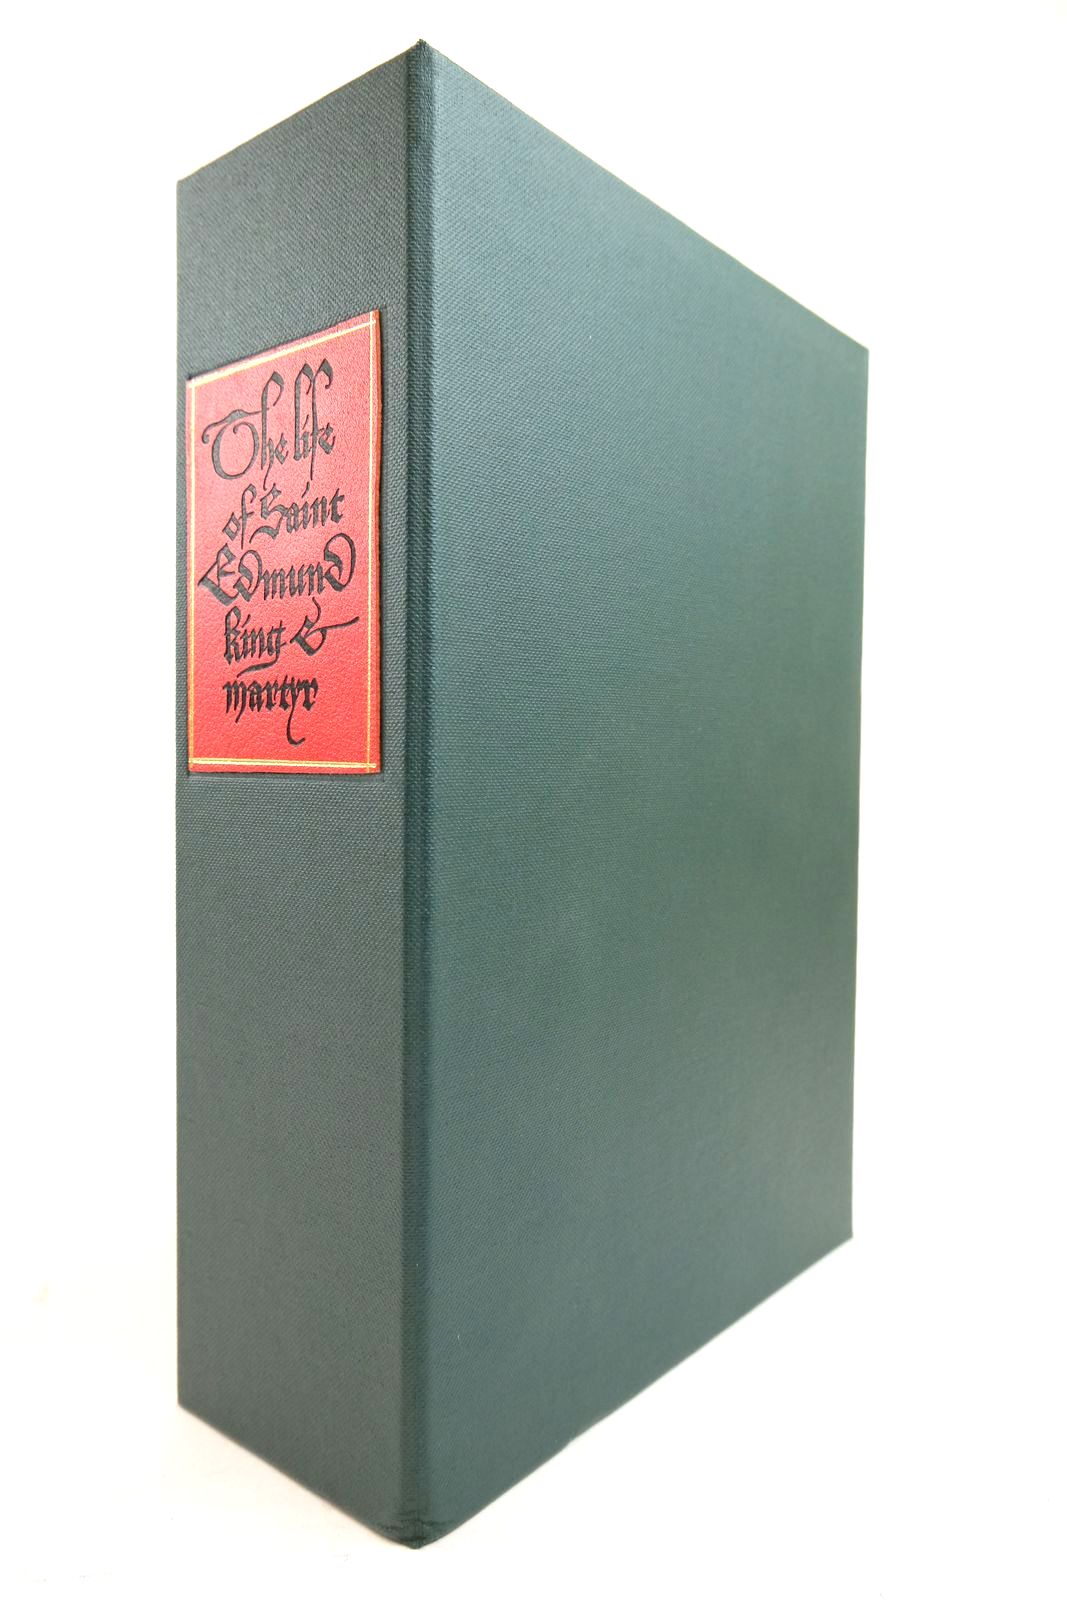 Photo of THE LIFE OF SAINT EDMUND KING &amp; MARTYR written by Lydgate, John Edwards, A.S.G. published by Folio Society (STOCK CODE: 2134708)  for sale by Stella & Rose's Books